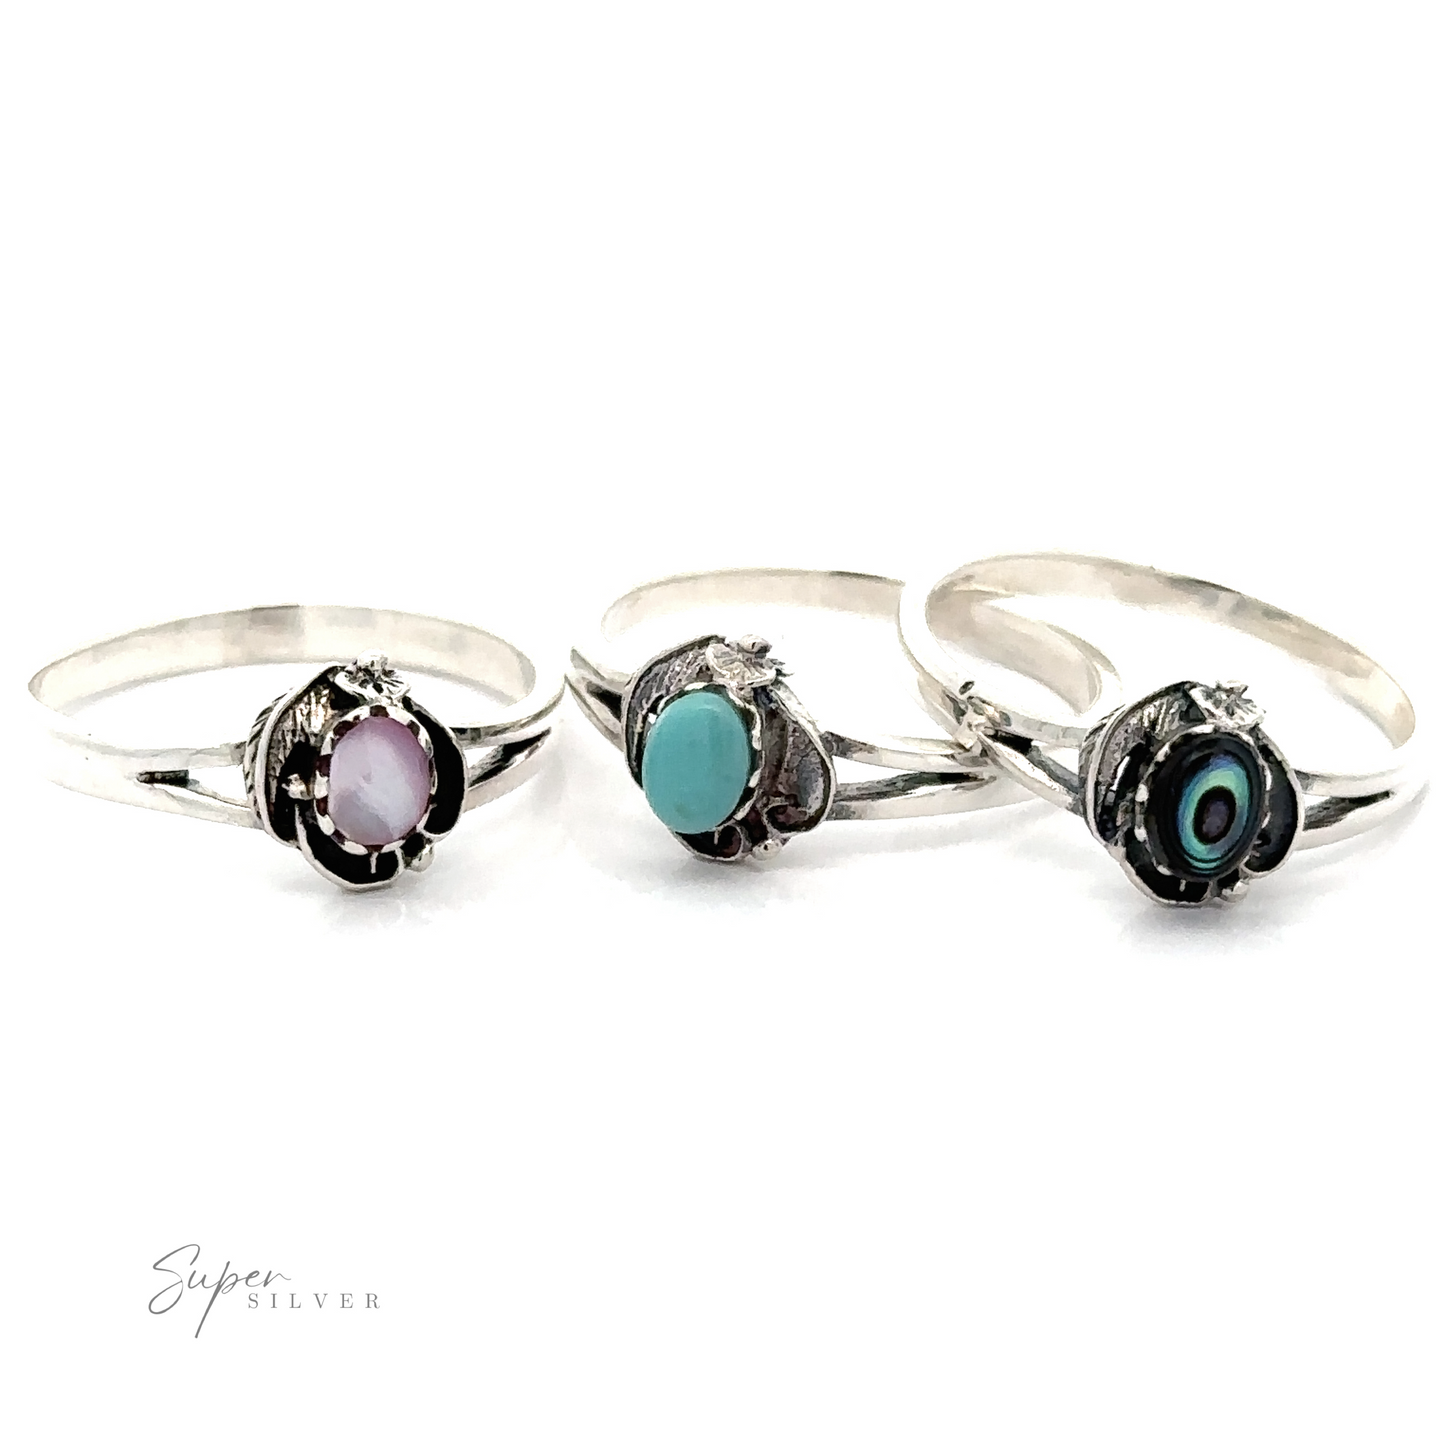 Three Stone Oval Rings With Delicate Detailing in sterling silver with turquoise stones.